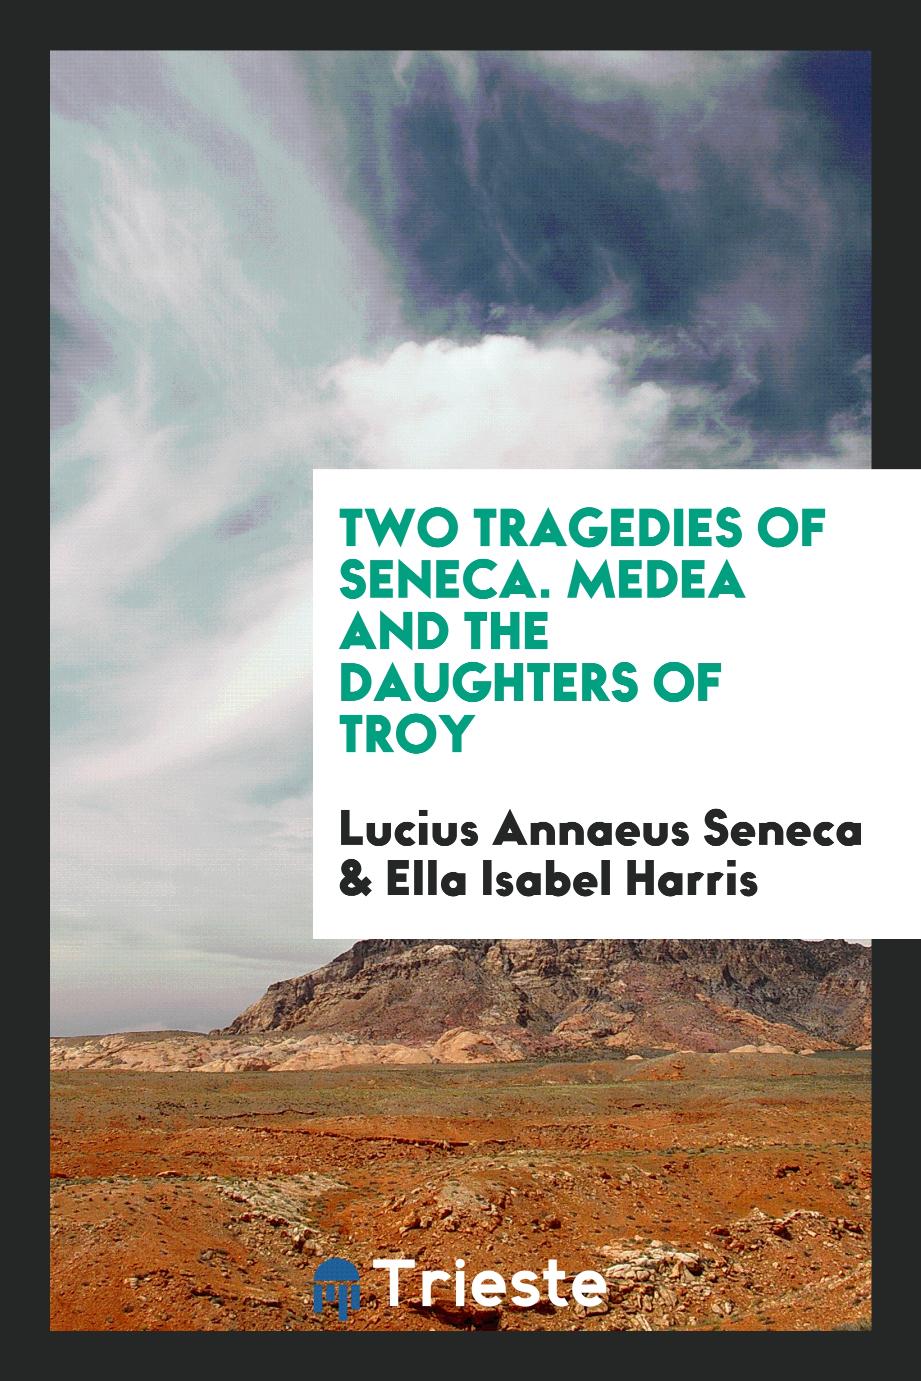 Two Tragedies of Seneca. Medea and the Daughters of Troy